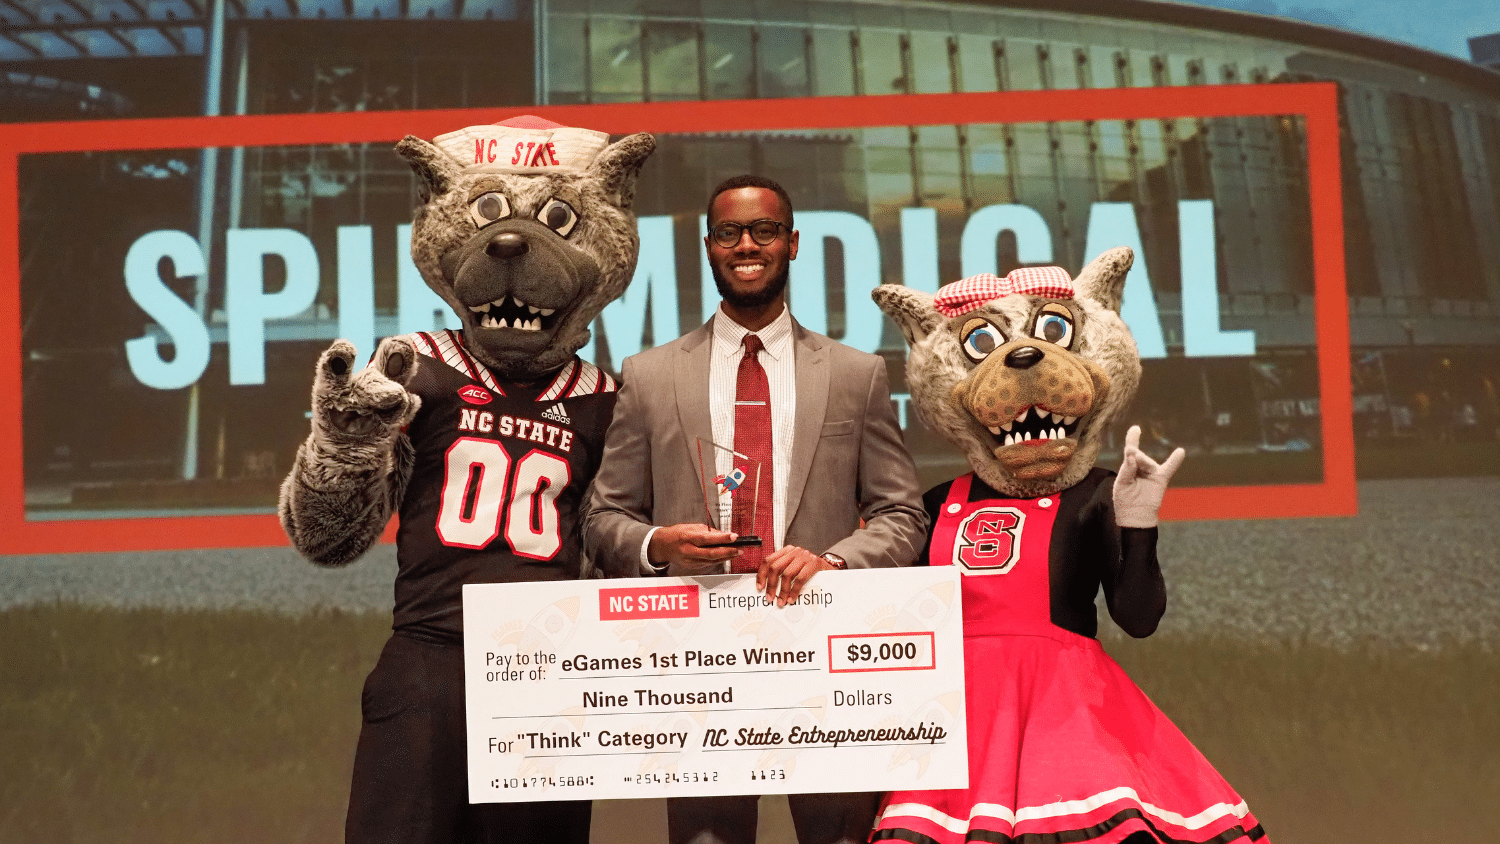 Mr. and Mrs. Wuf pose with the first-place winner of the eGames, who is holding a giant check